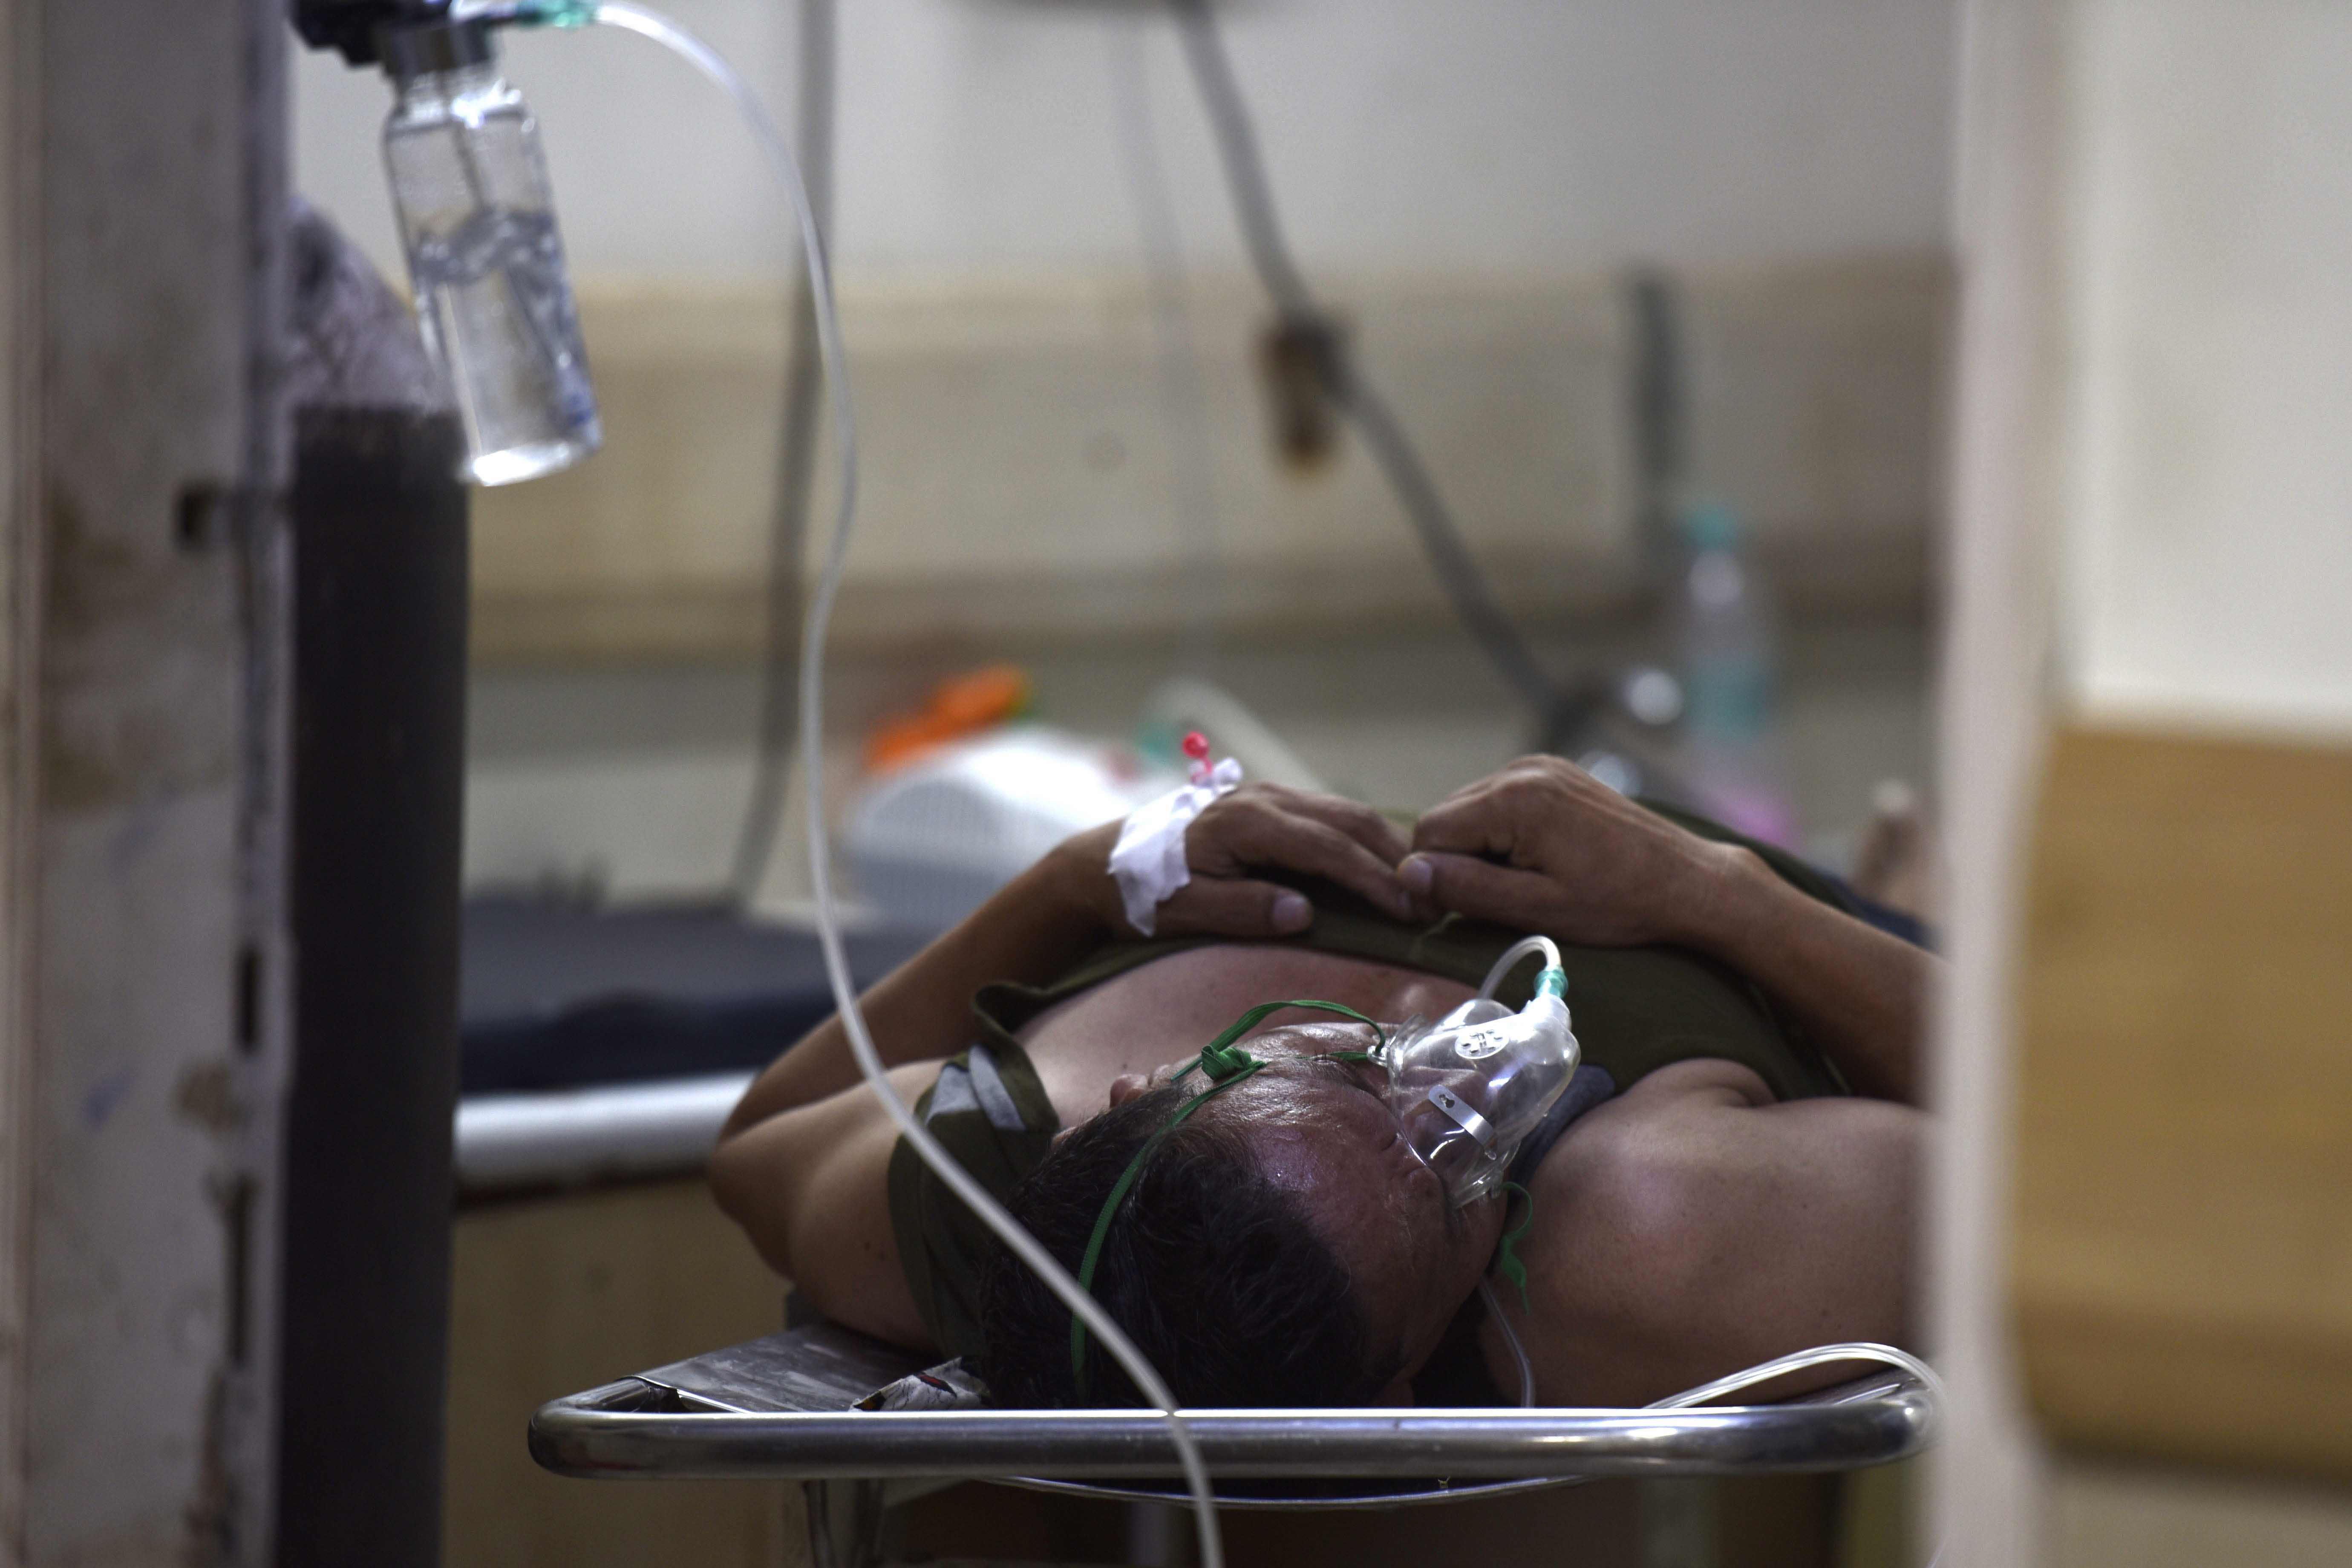 NOIDA, INDIA  APRIL 28: A Covid-19 patient on oxygen support inside the emergency ward at a district hospital at sector 30, on April 28, 2021 in Noida, India. (Photo by Sunil Ghosh/Hindustan Times via Getty Images) (Foto: Hindustan Times via Getty Images)